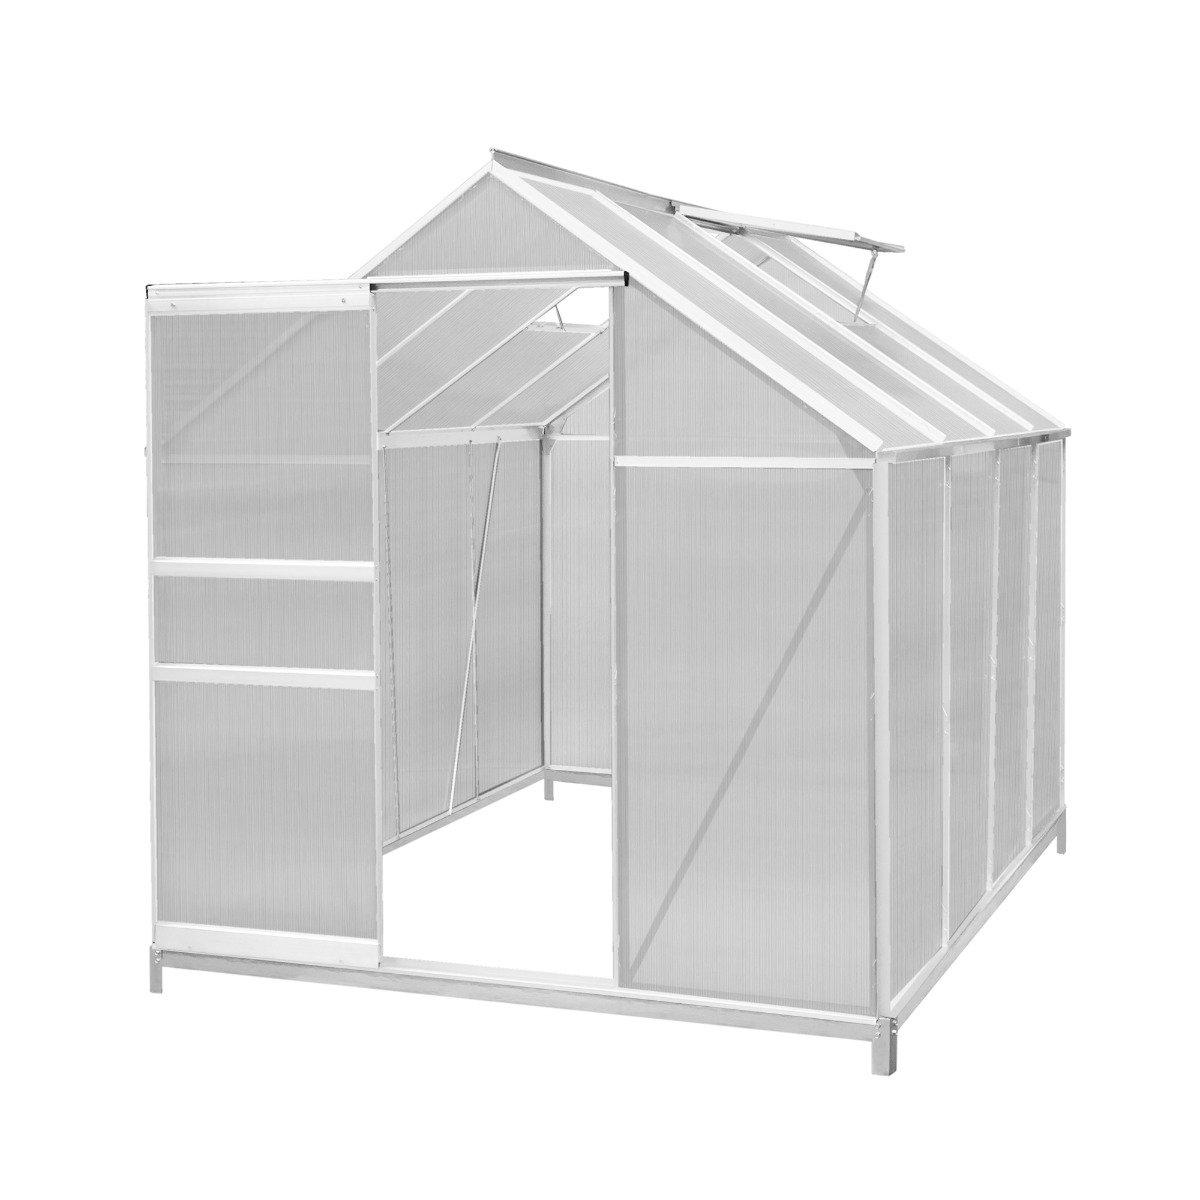 Polycarbonate Greenhouse 6ft x 8ft With Base - Silver